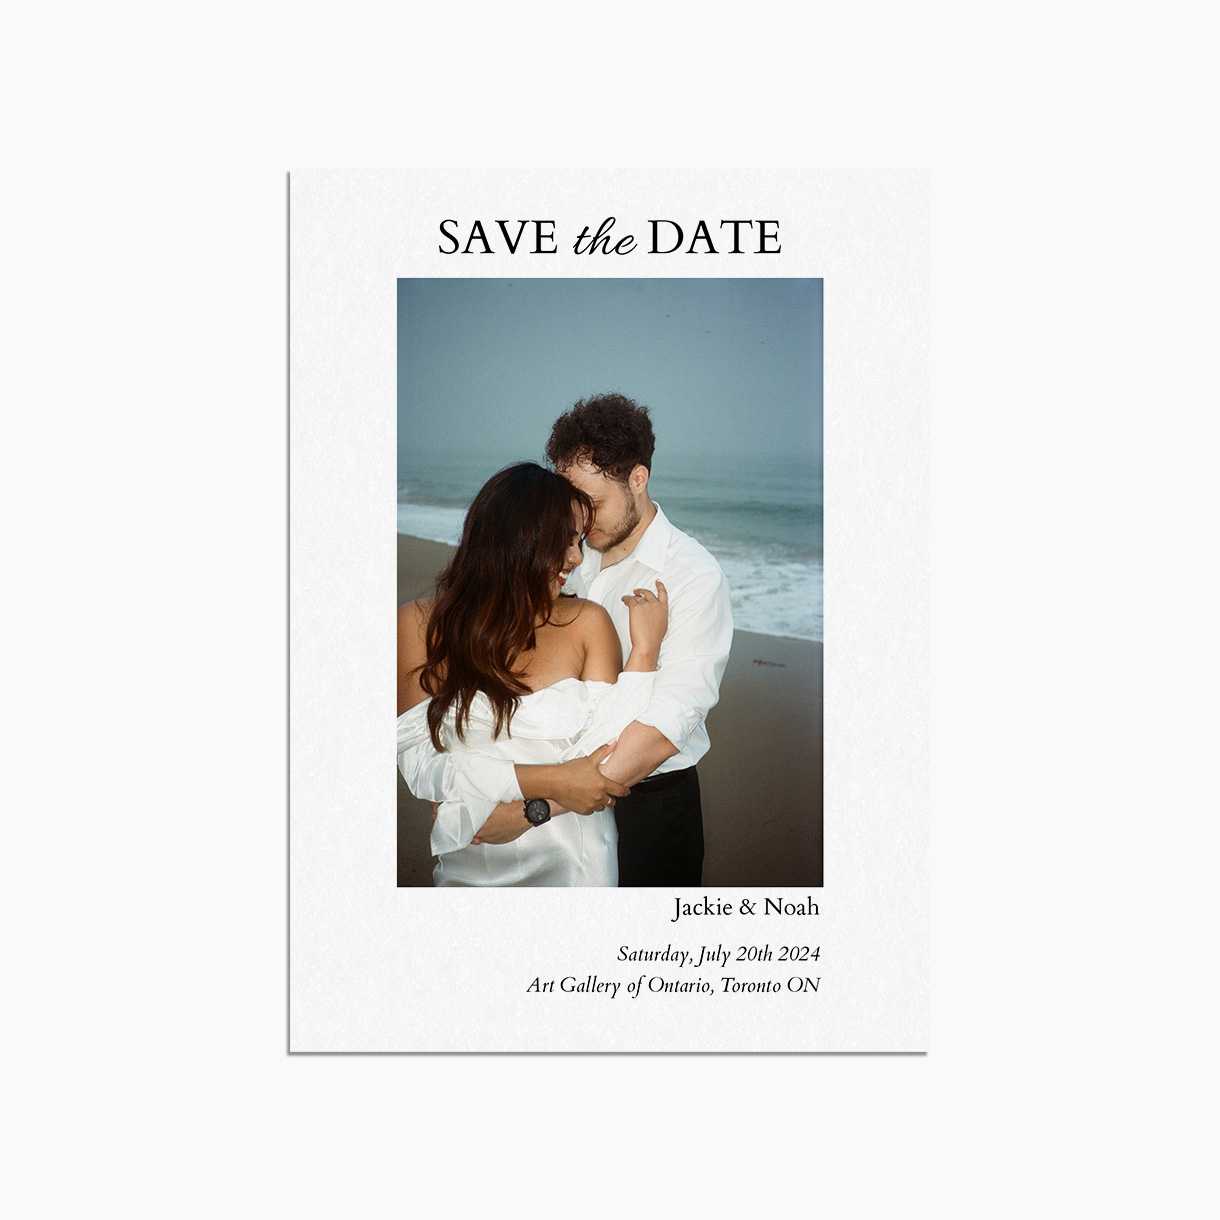 Save the date wedding invitation card featuring 